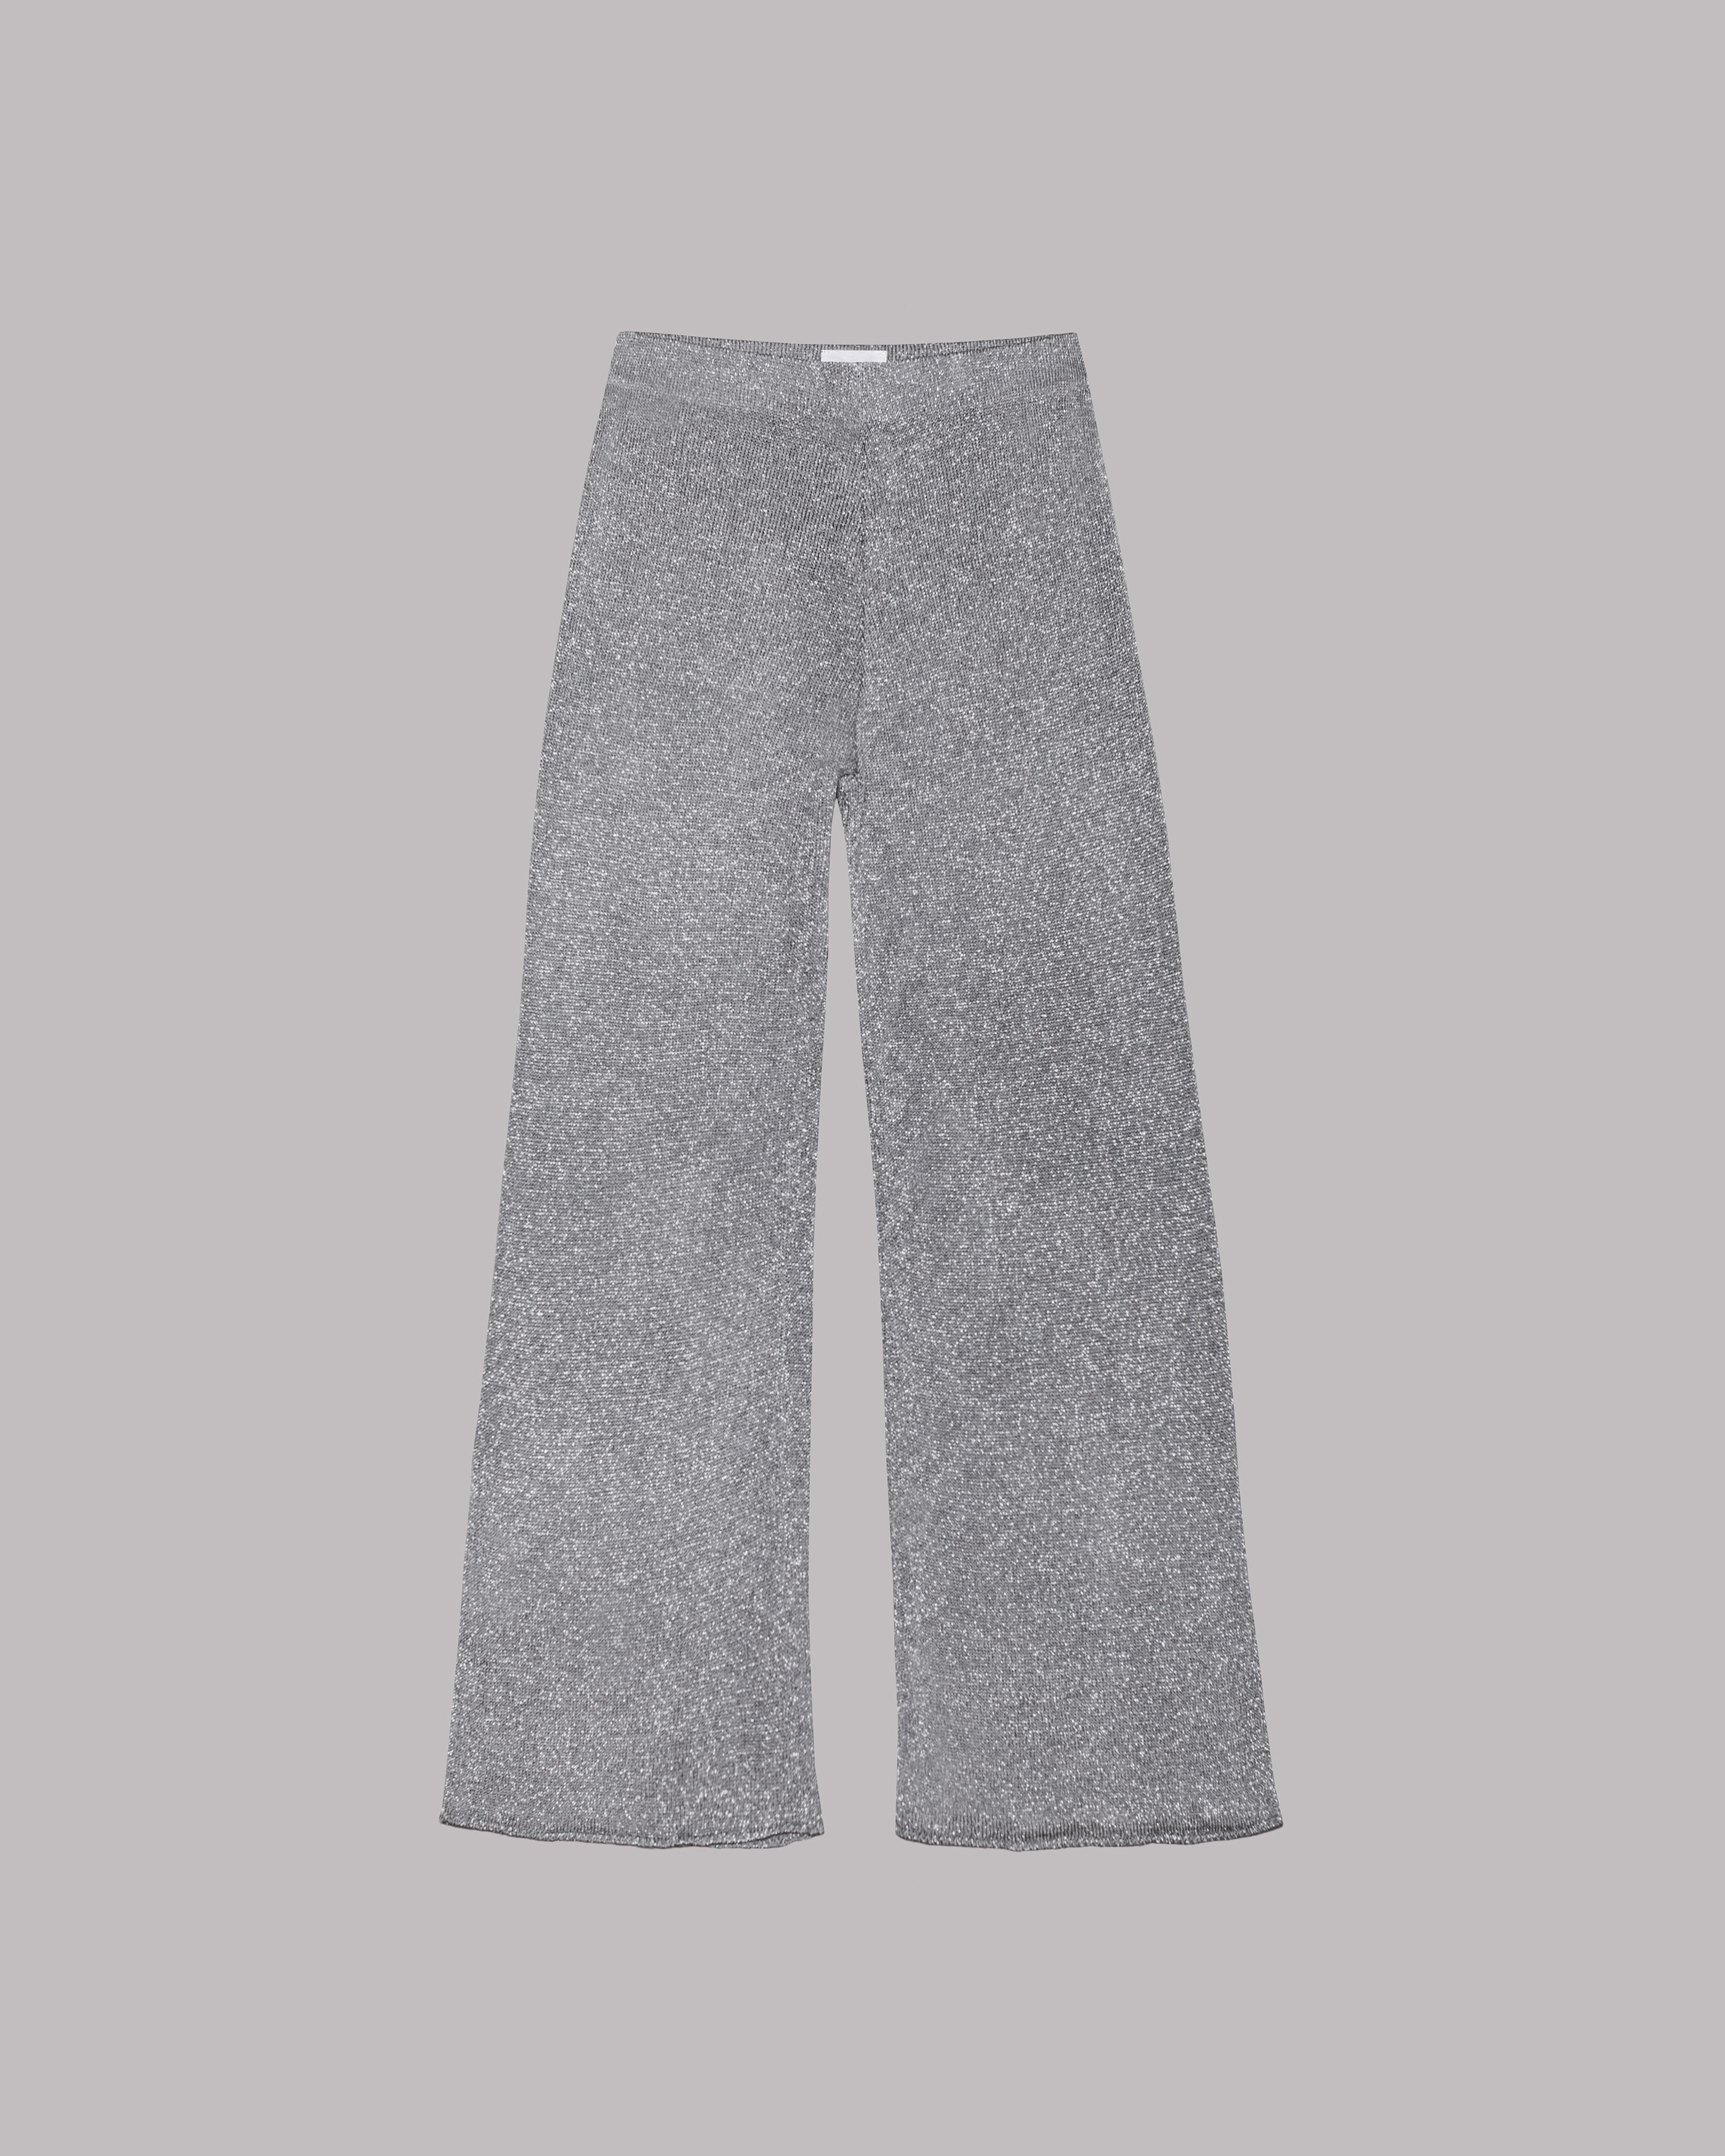 The Silver Sparkly Thin Knit Pants